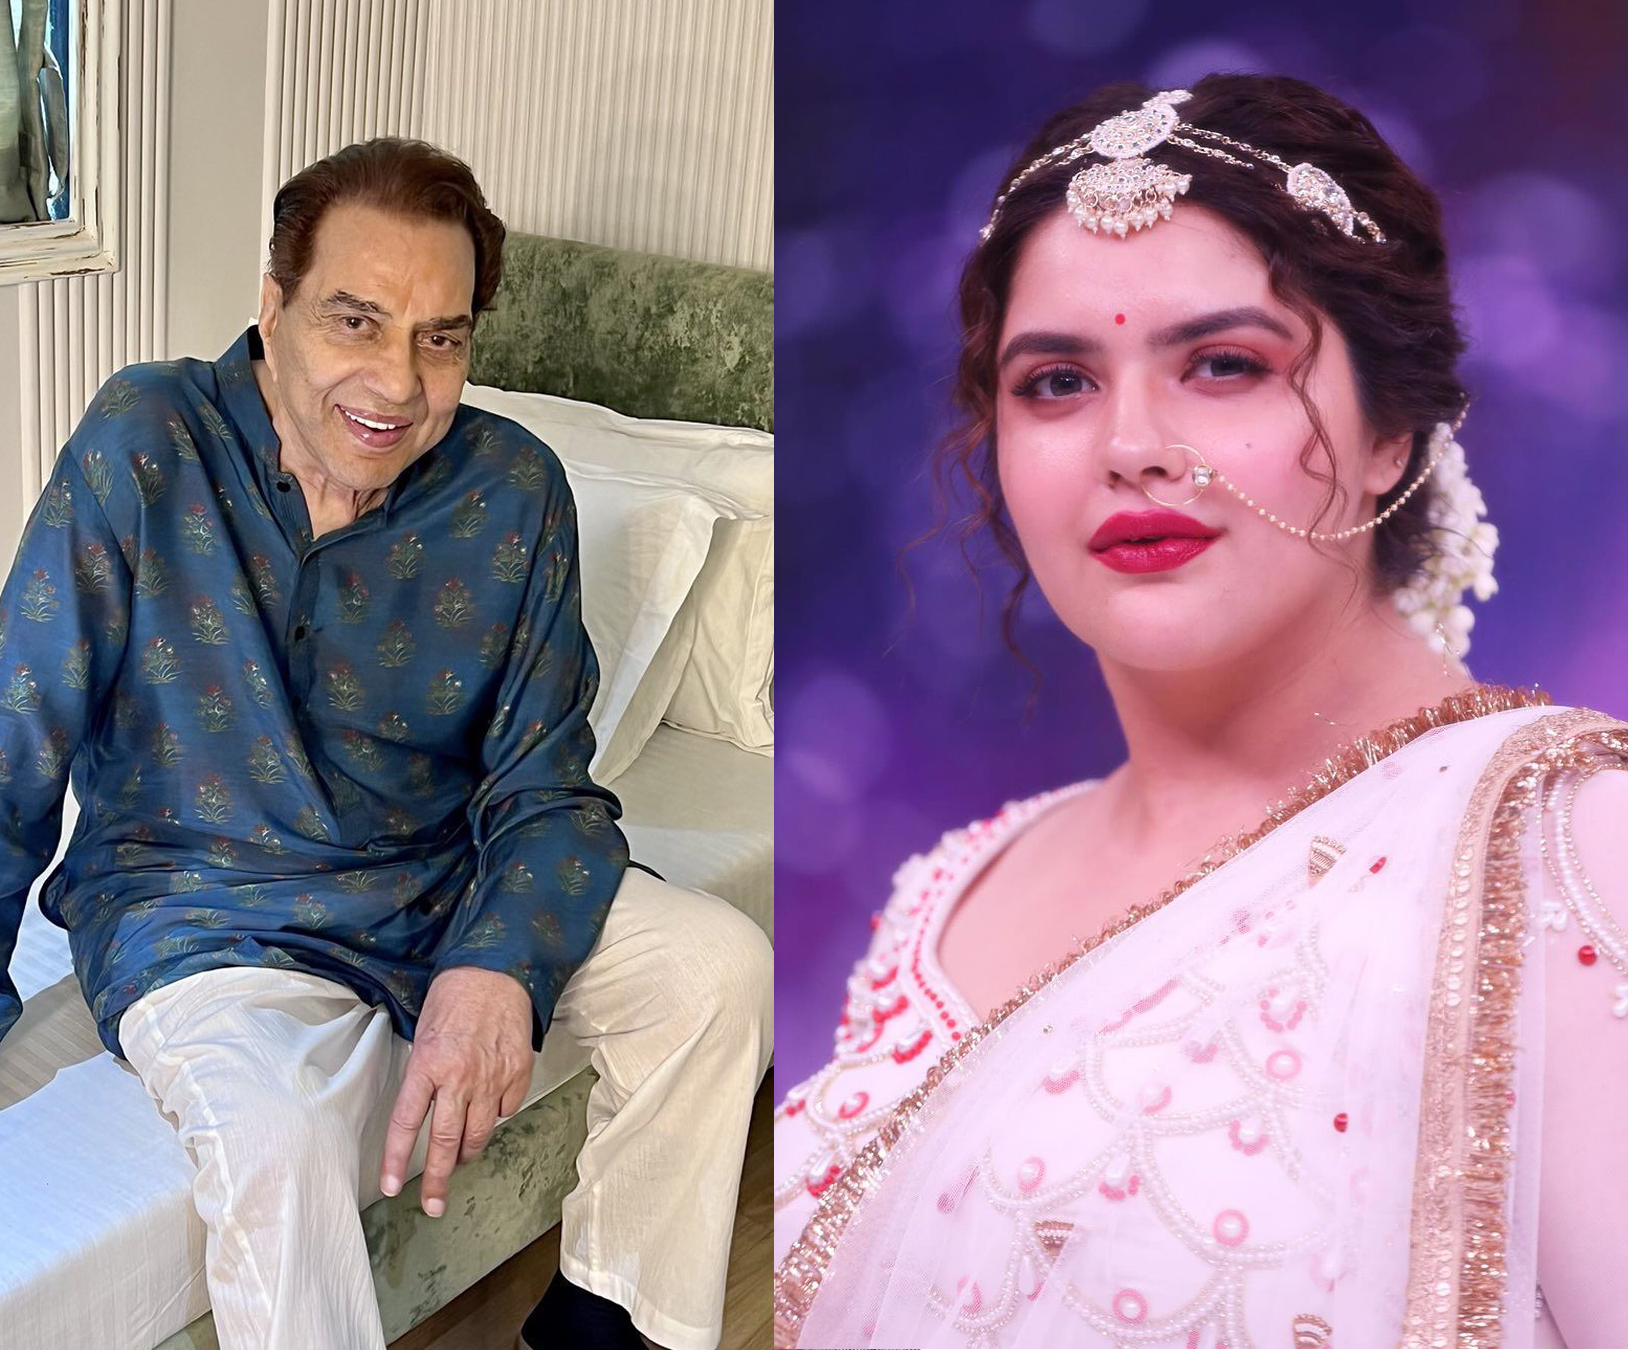 Anjali Anand Shares A Lovely Birthday Wish For The Legendary Dharmendra And Writes, “Love You Dharamji, God Bless You And Your Family Always”!